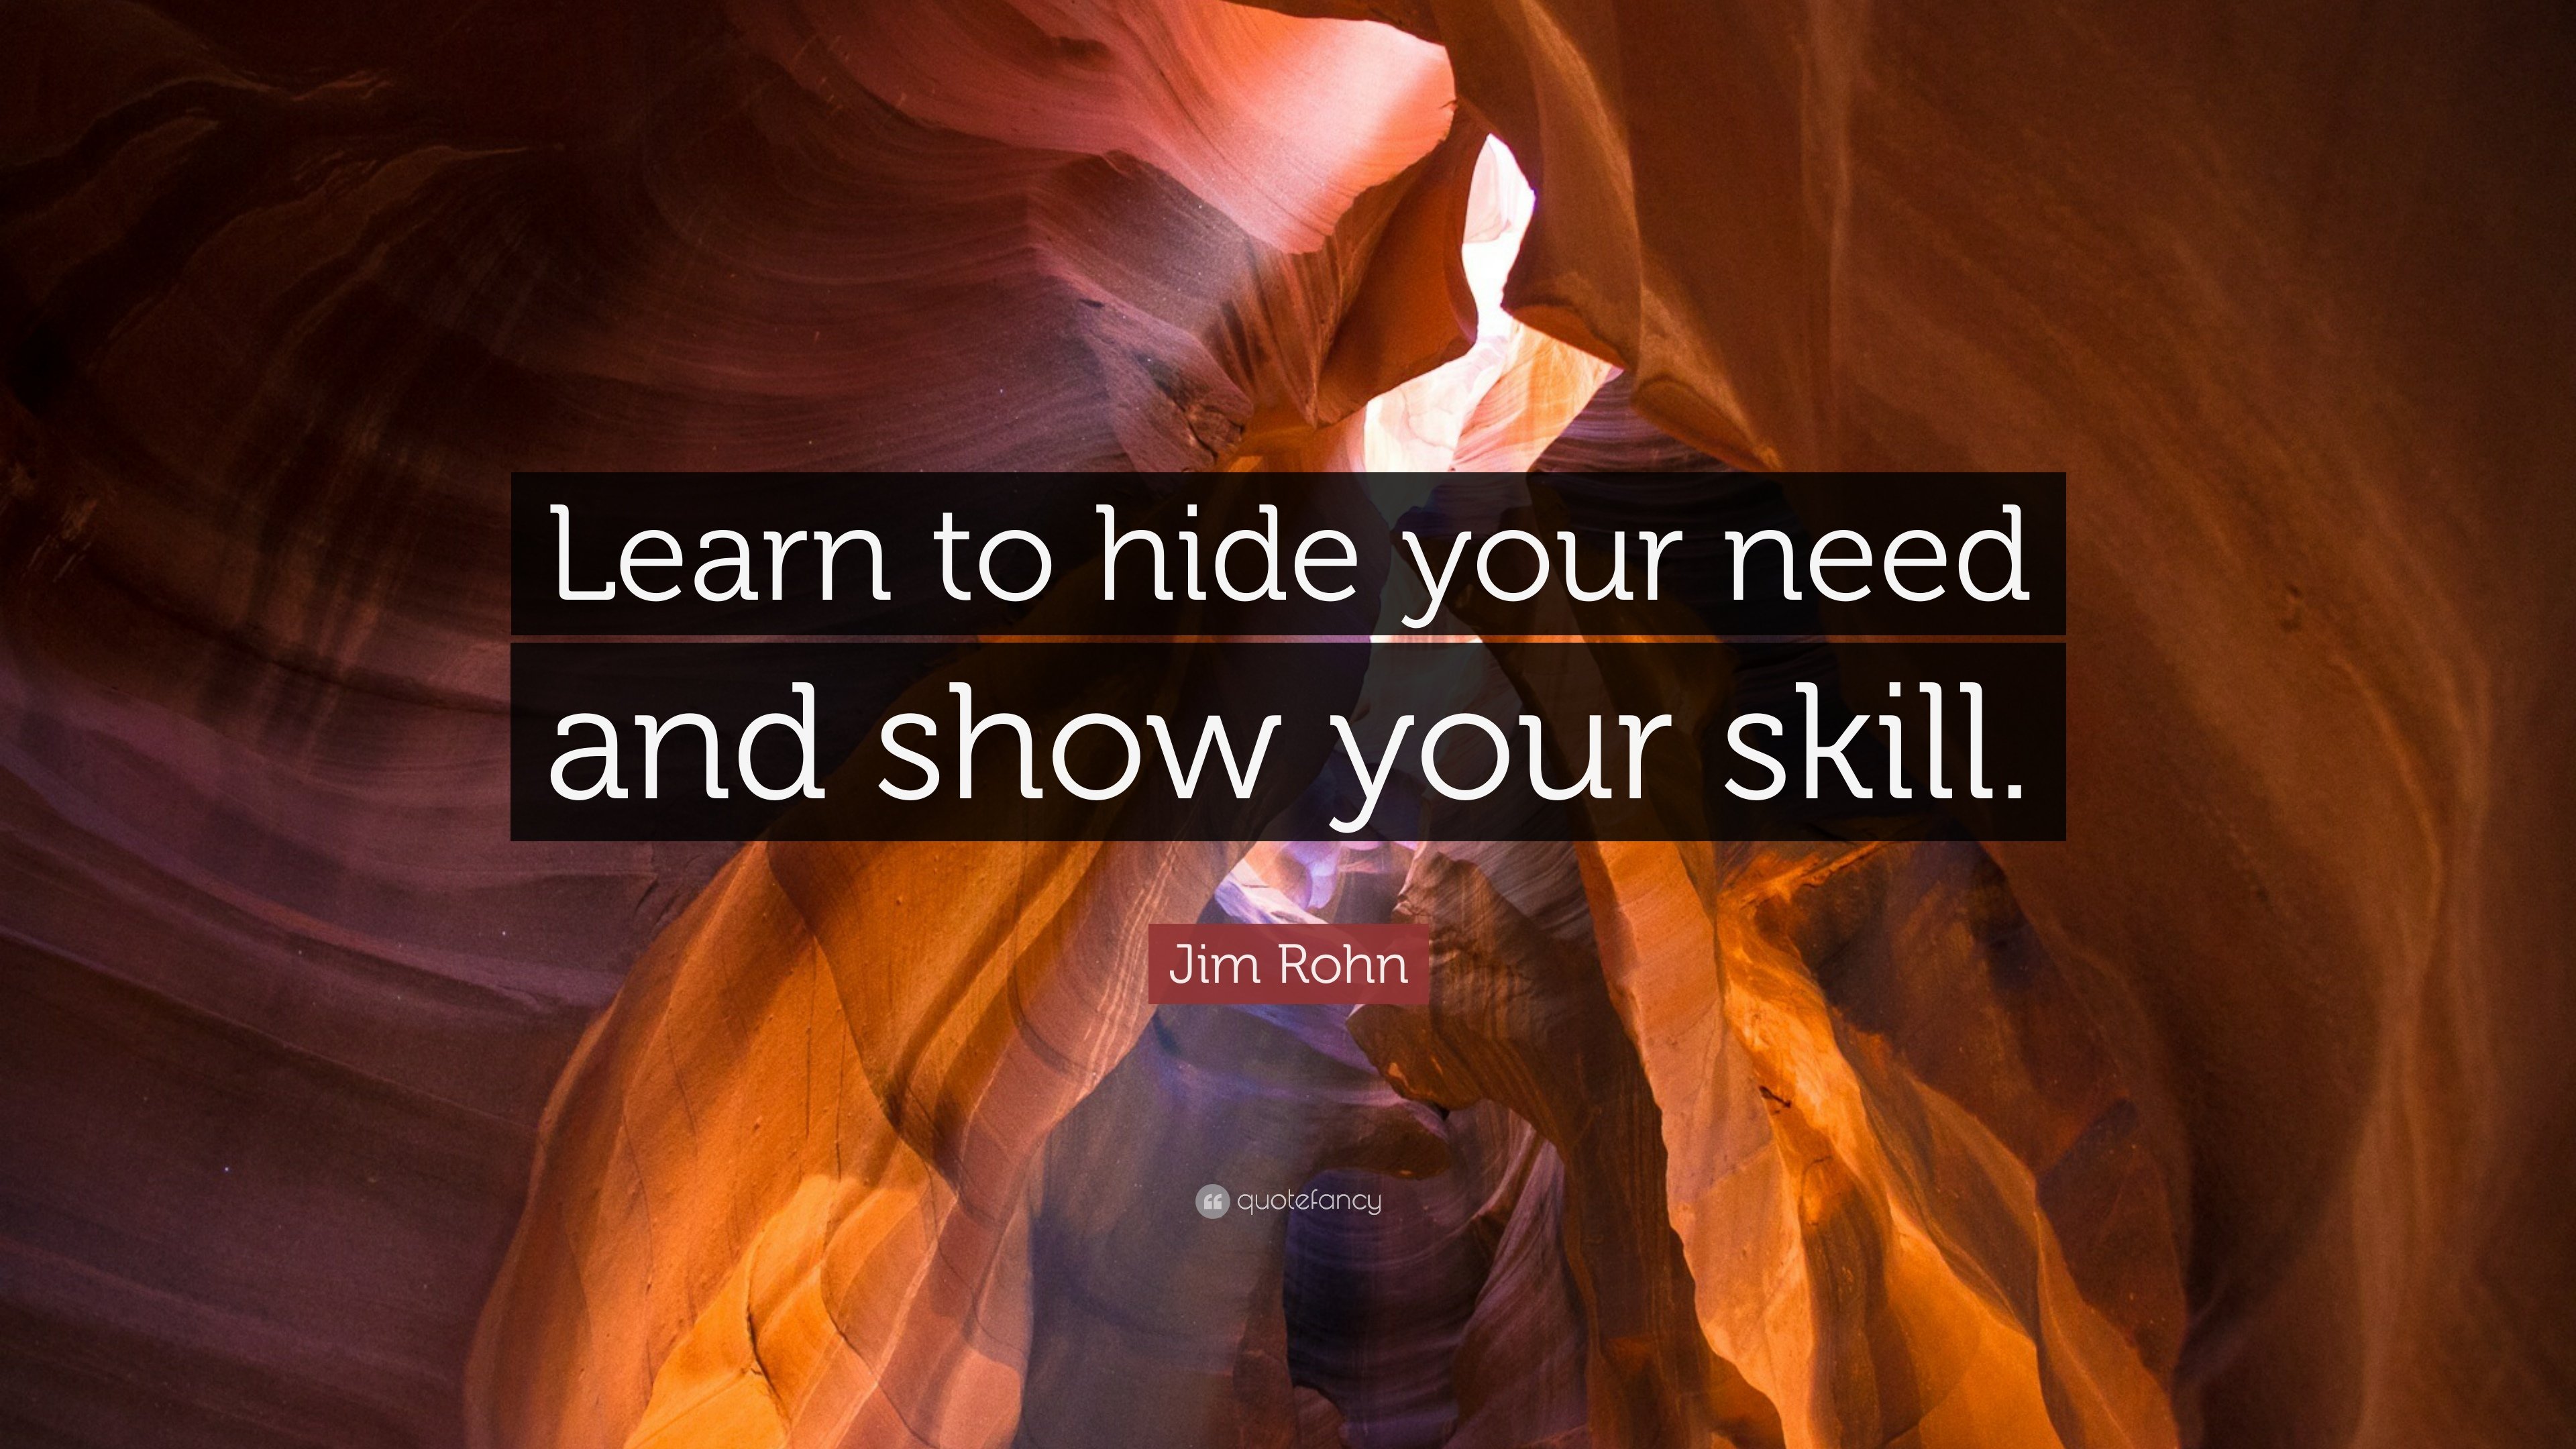 Jim Rohn Quote: “Learn to hide your need and show your skill